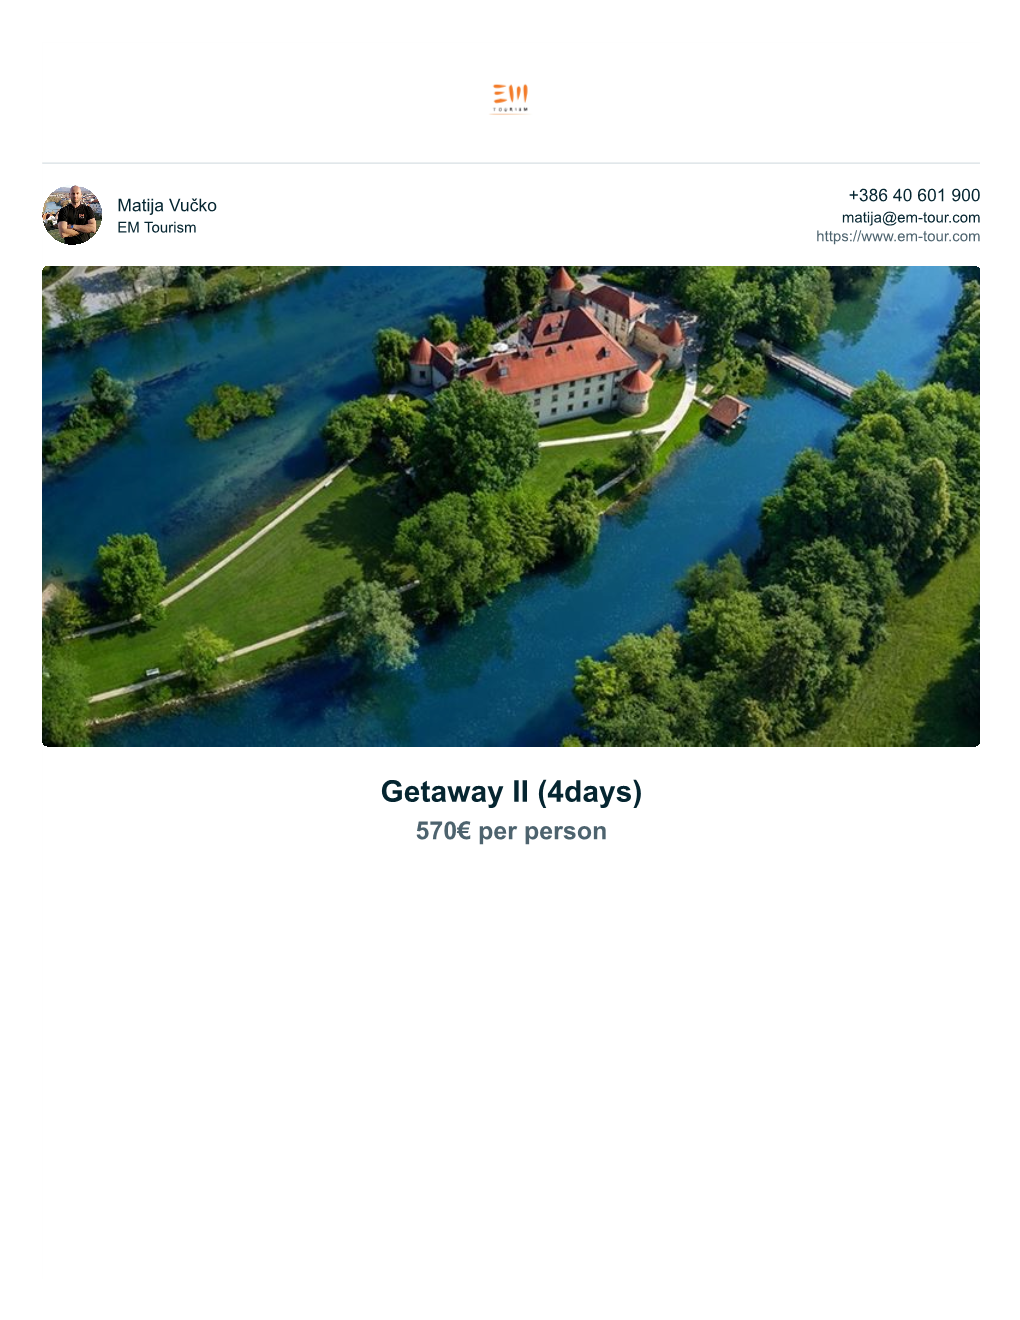 Getaway II (4Days) 570€ Per Person Page 2 of 10 Trip Summary